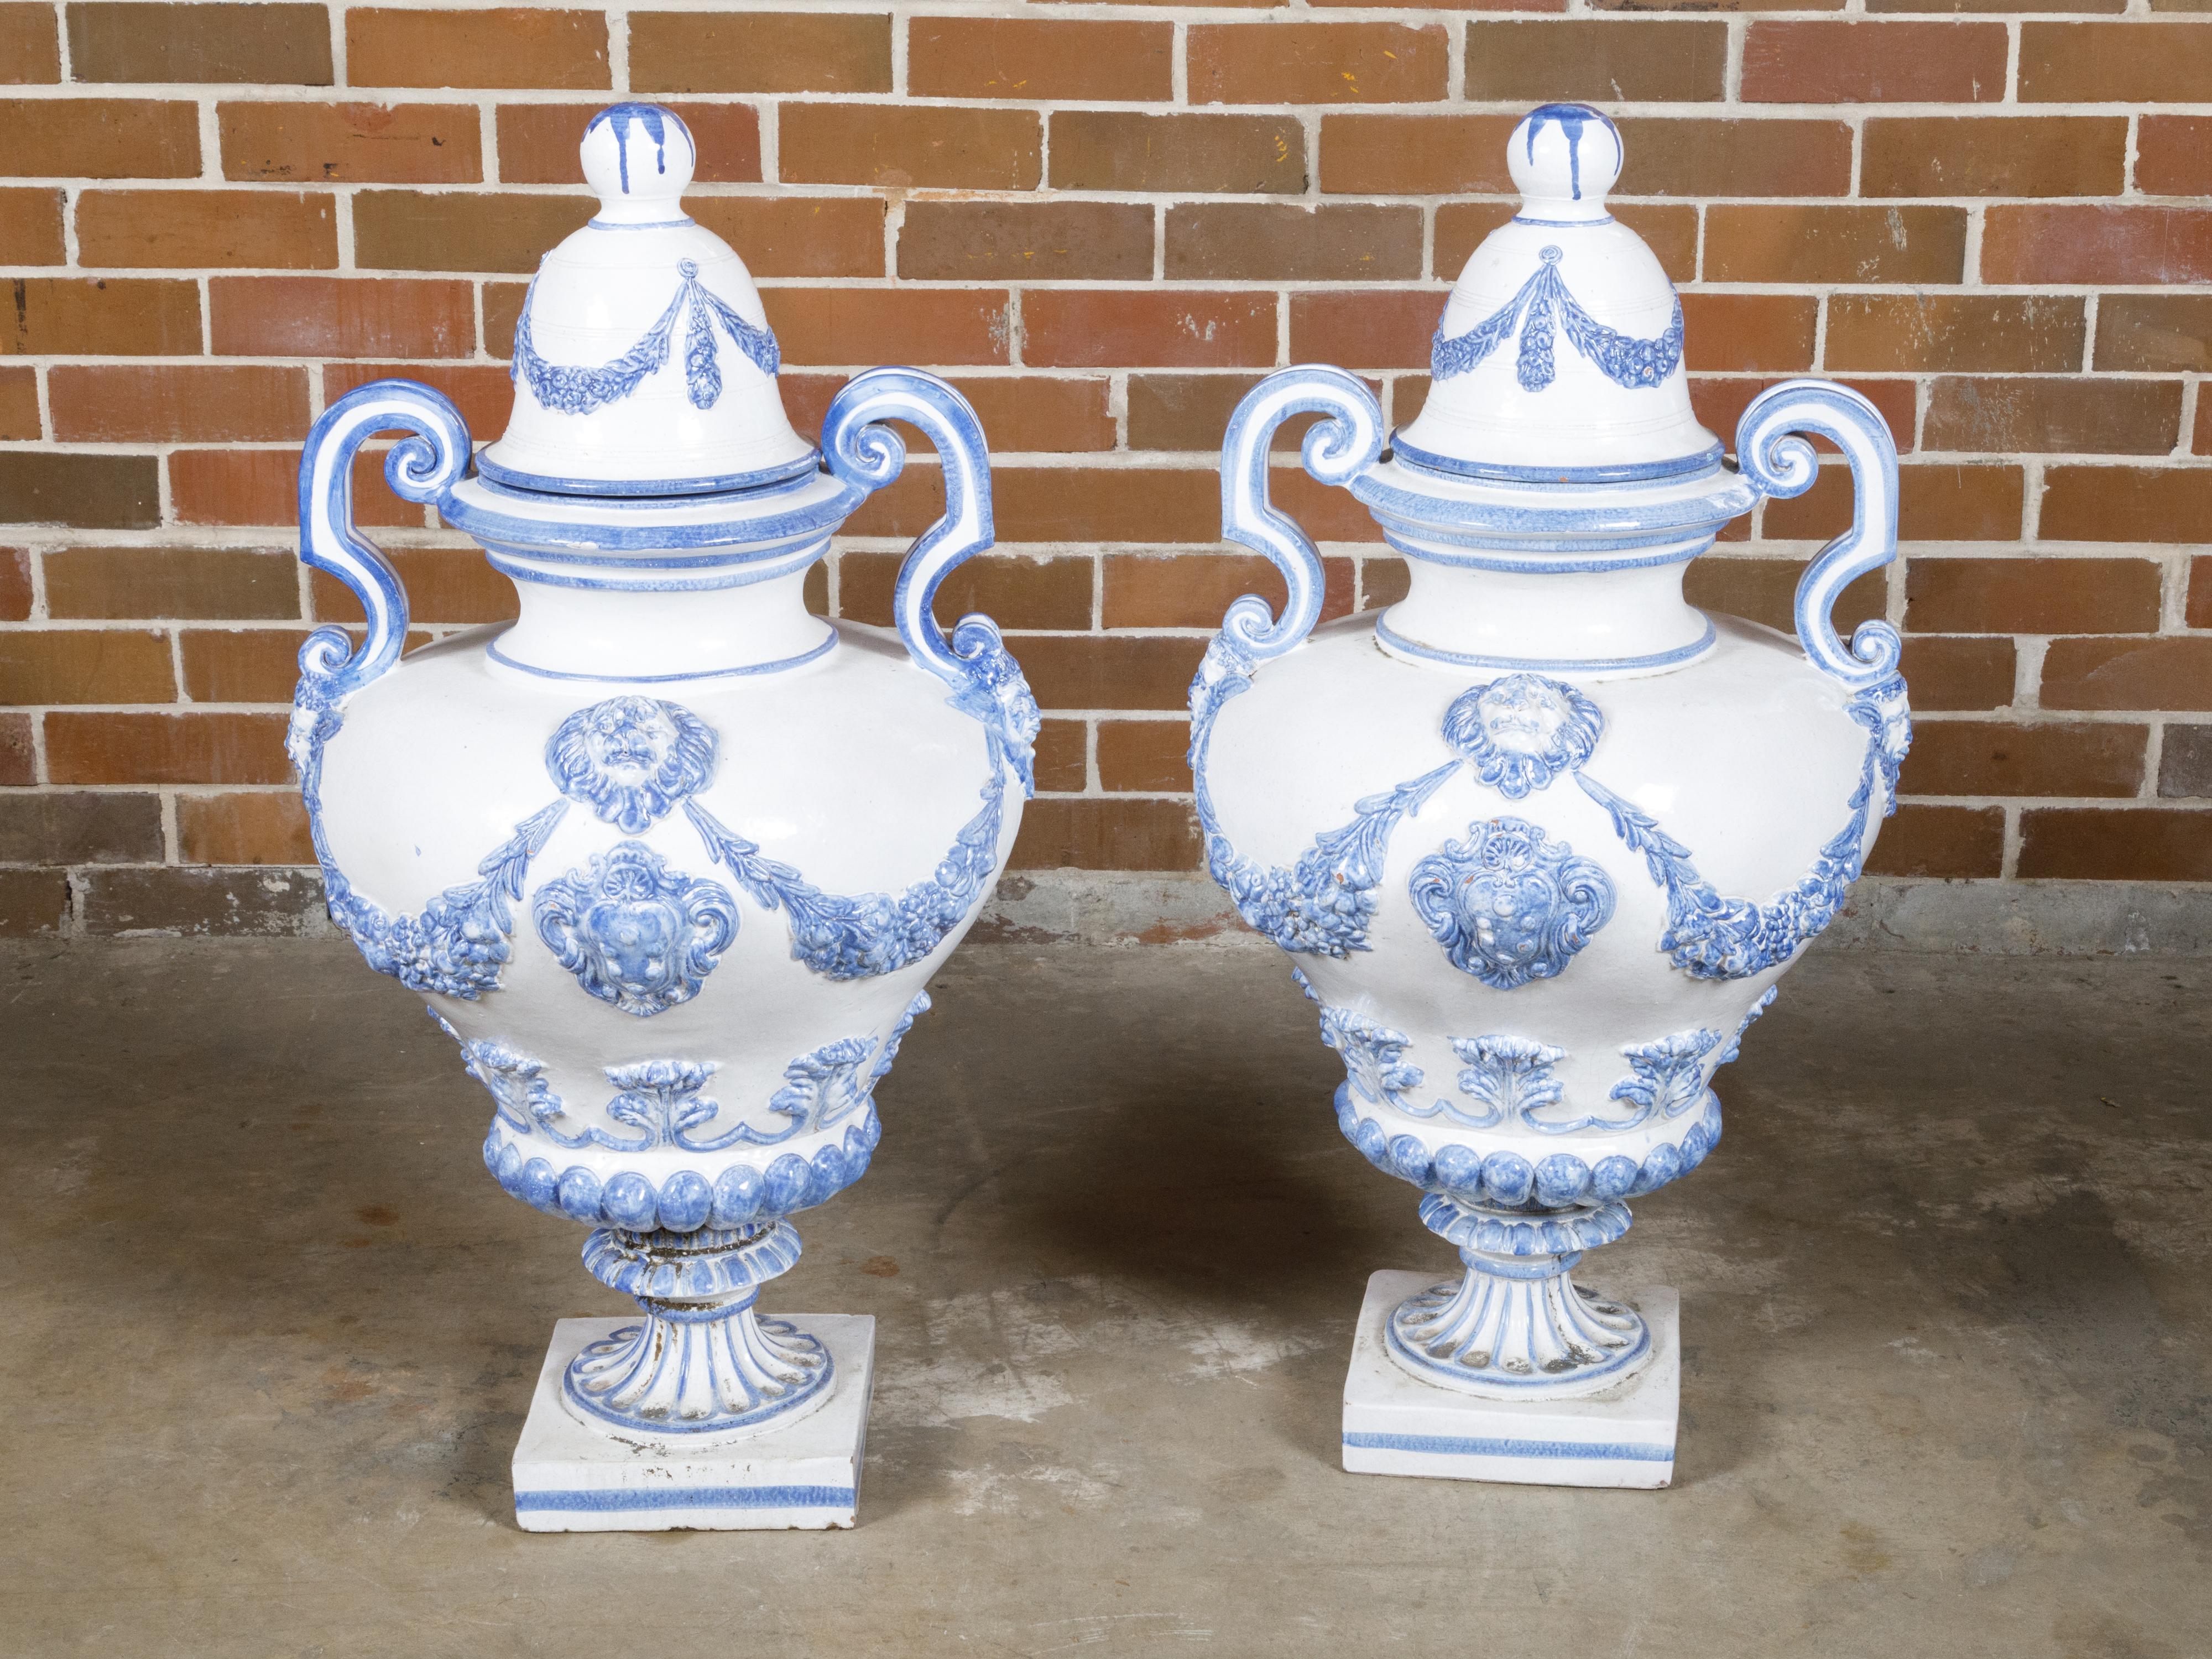 Italian Turn of the Century Blue and White Faience Lidded Jars with Fauns, Pair For Sale 9